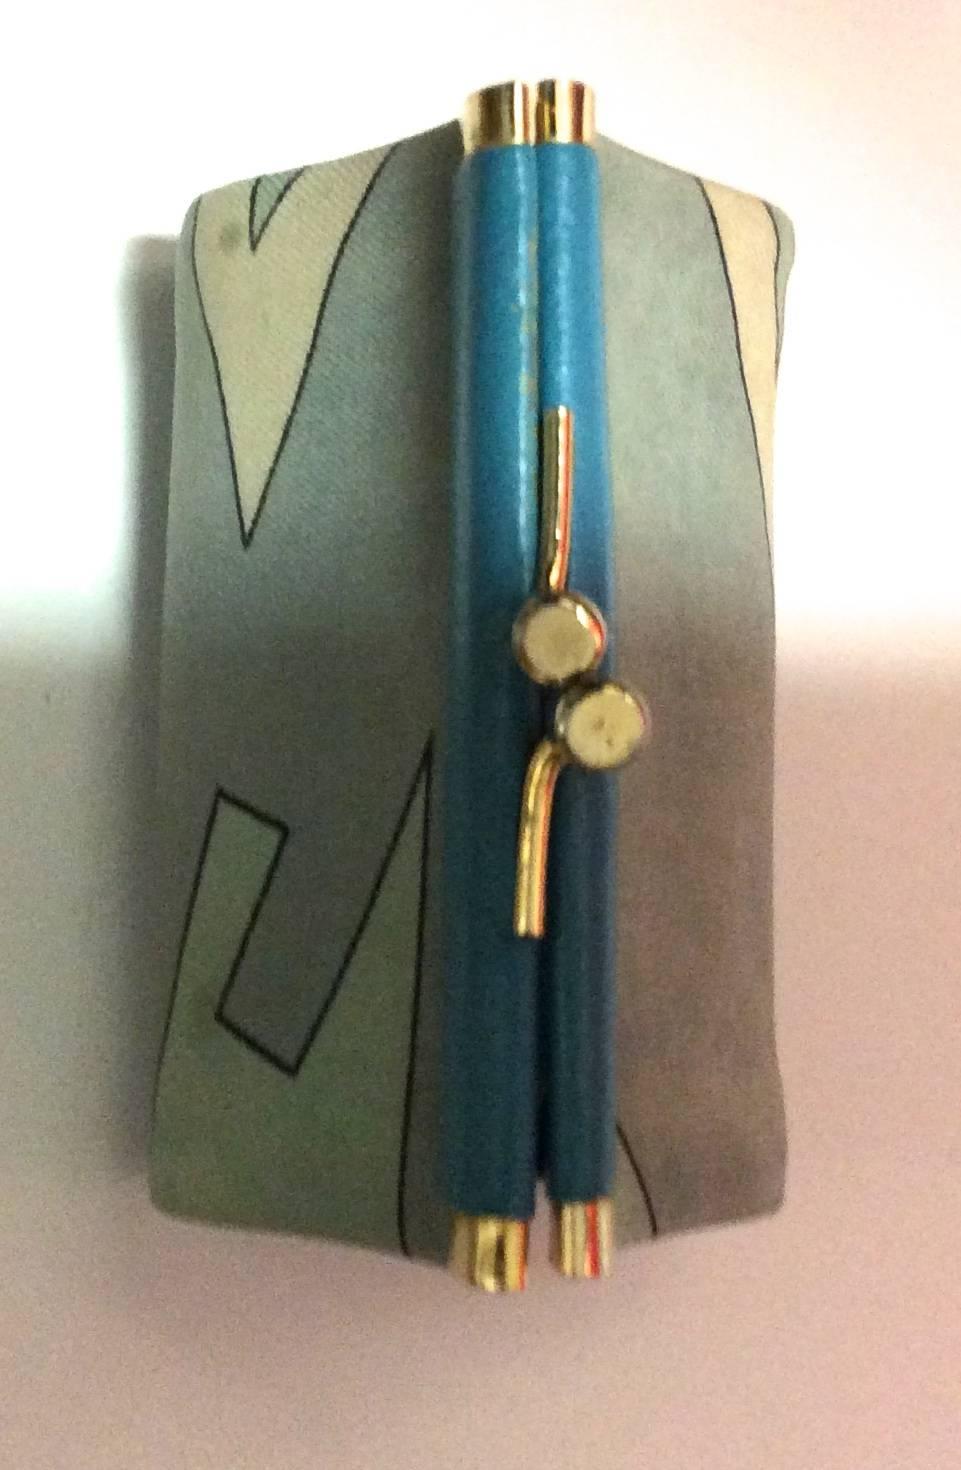 You are looking at a 1960's Emilio Pucci leather and silk coin purse. The change purse is in fair condition with fading to the silk. The teal blue leather trim on the center of both sides is in very nice condition and the snap enclosure is trimmed